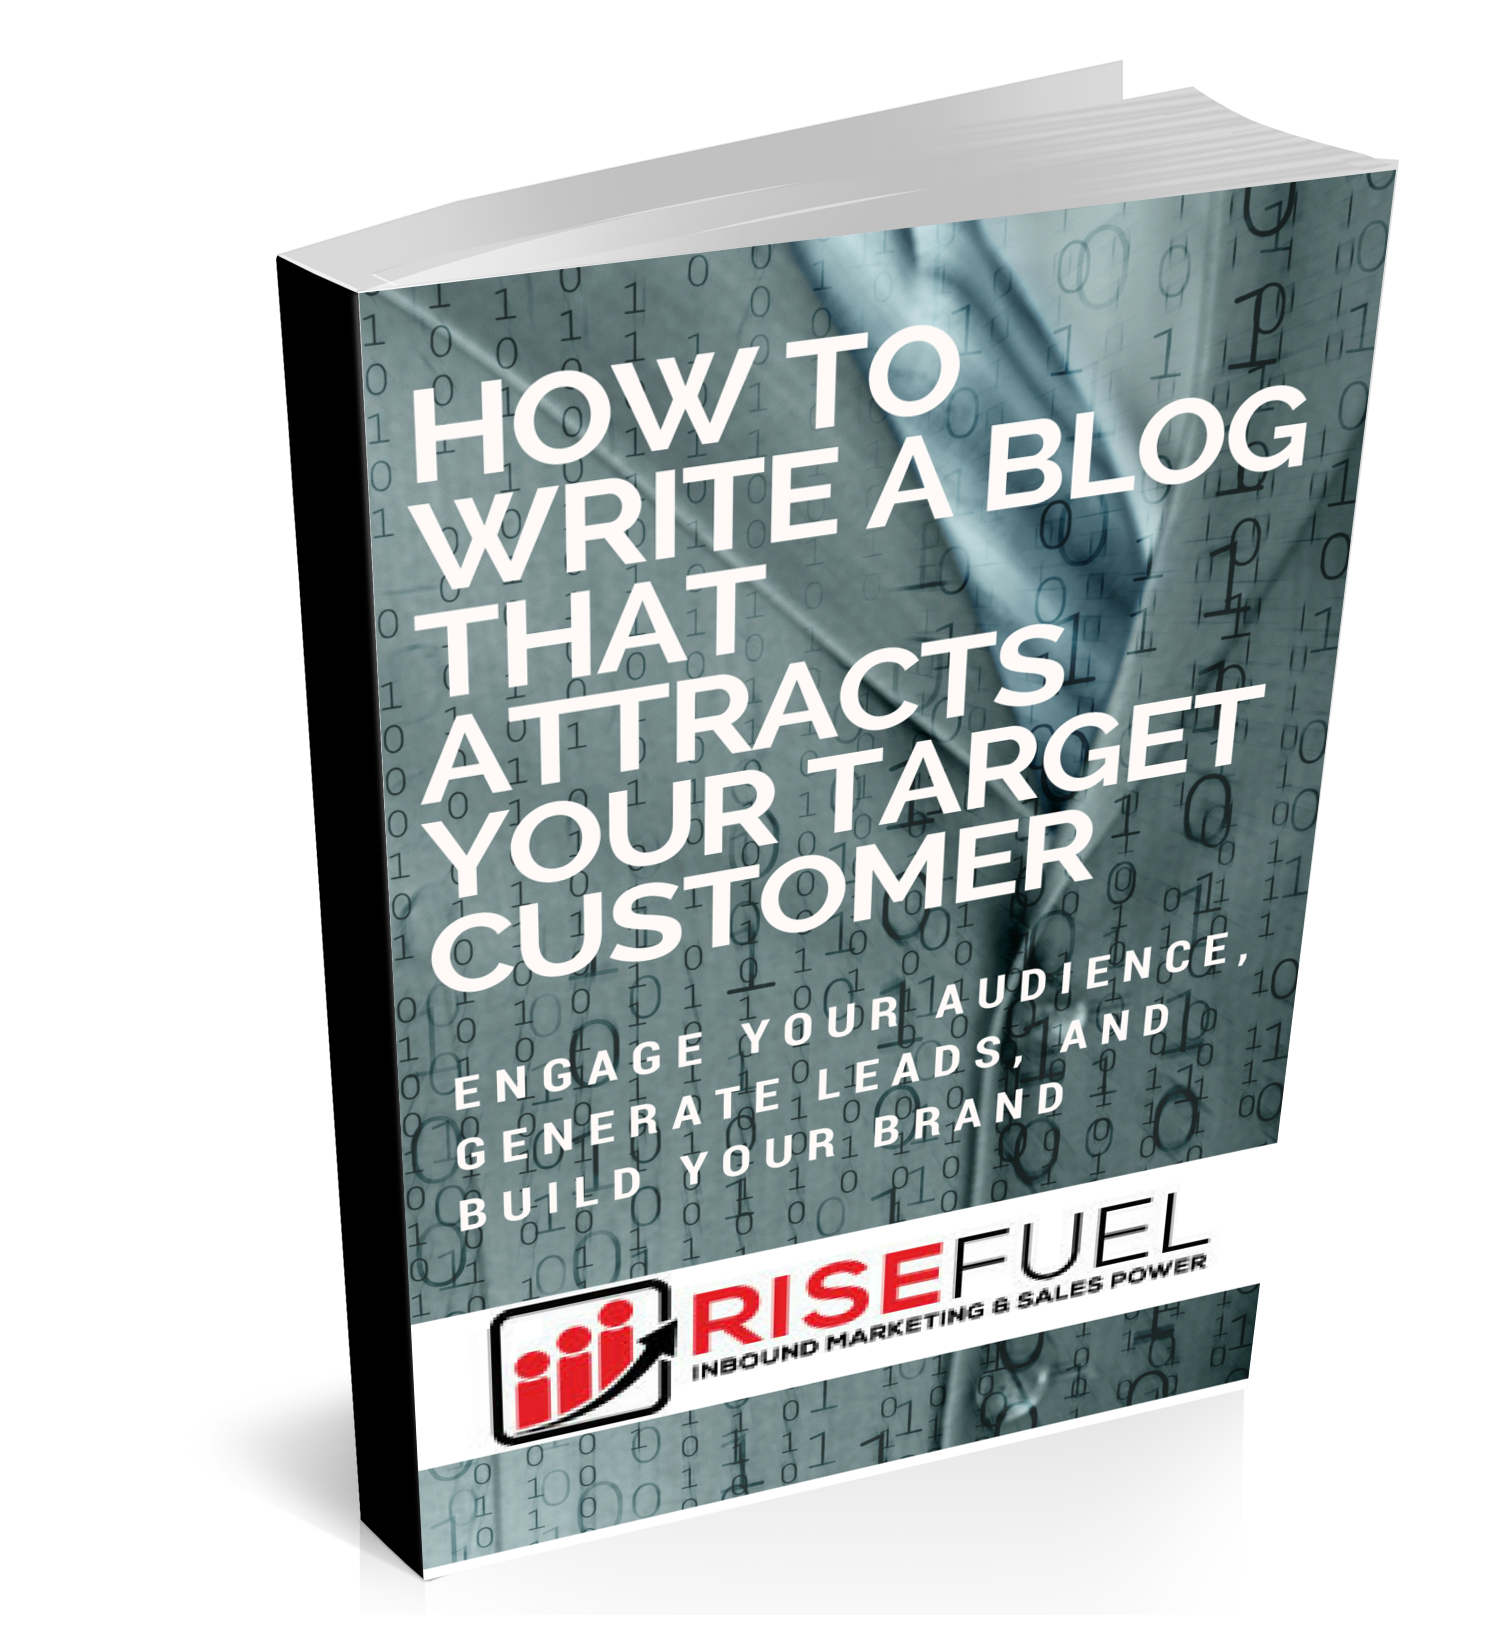 HOW TO WRITE BLOGS THAT ATTRACT